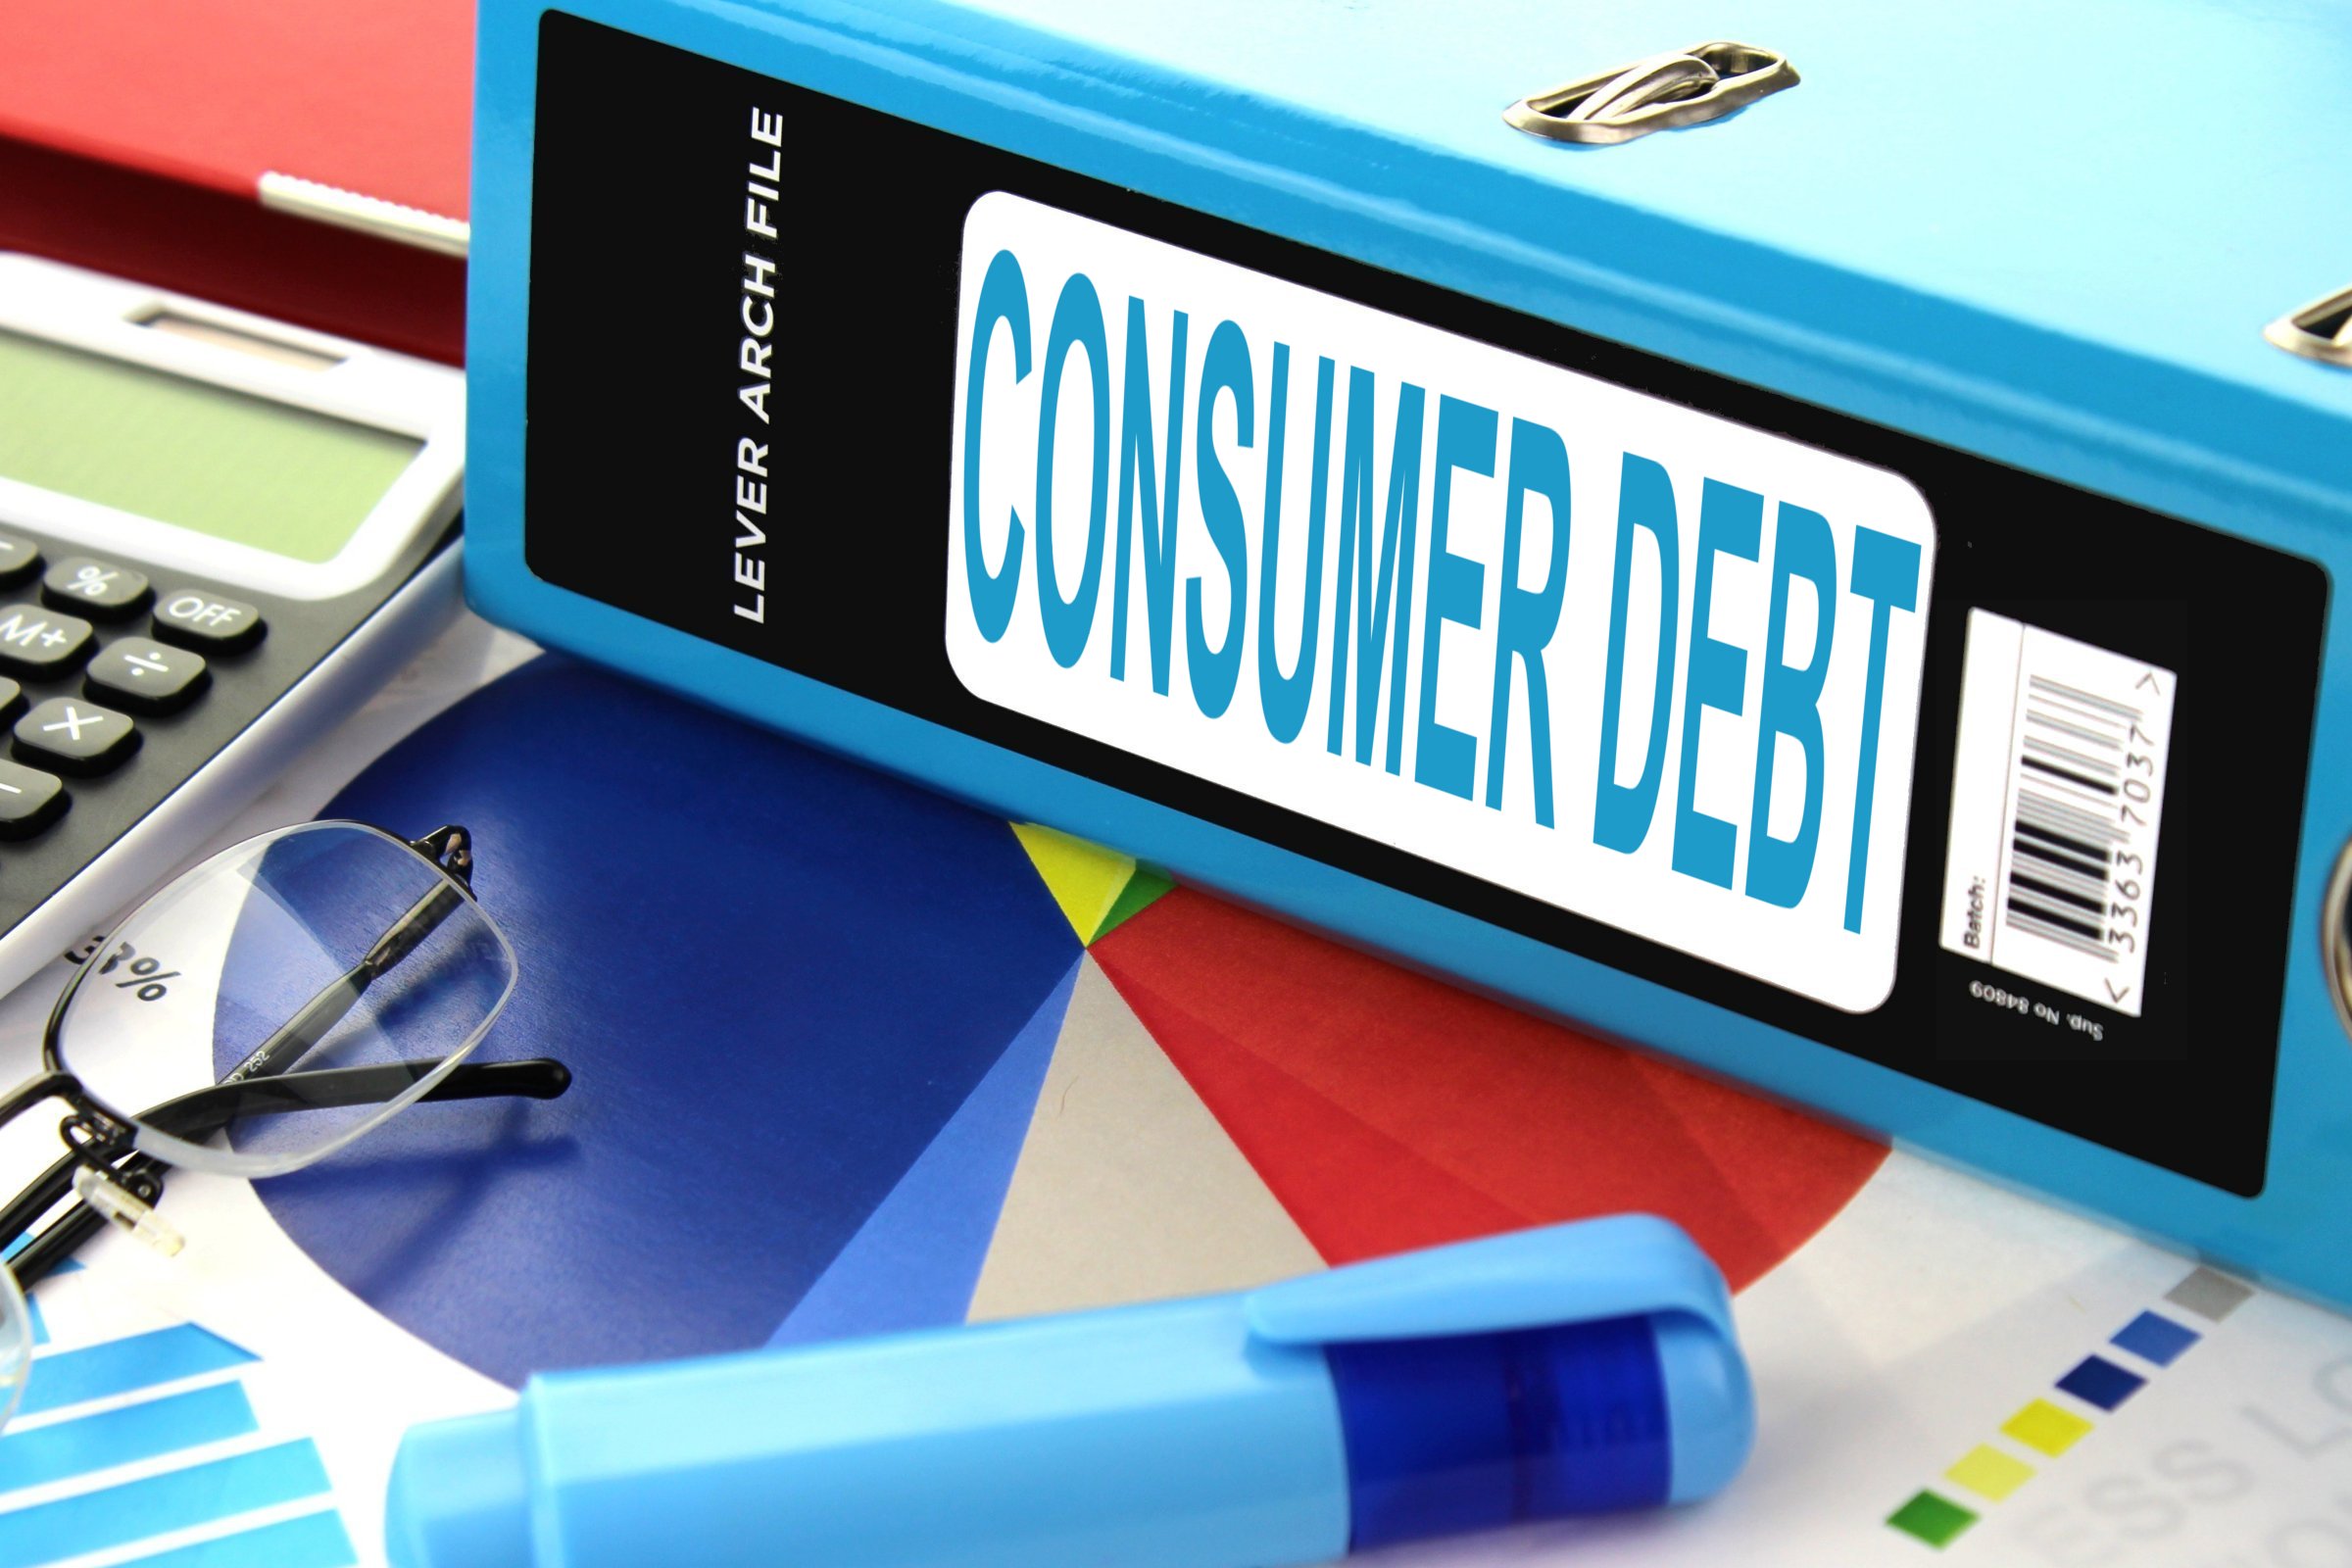 Consumer Debt - Free of Charge Creative Commons Lever arch file image